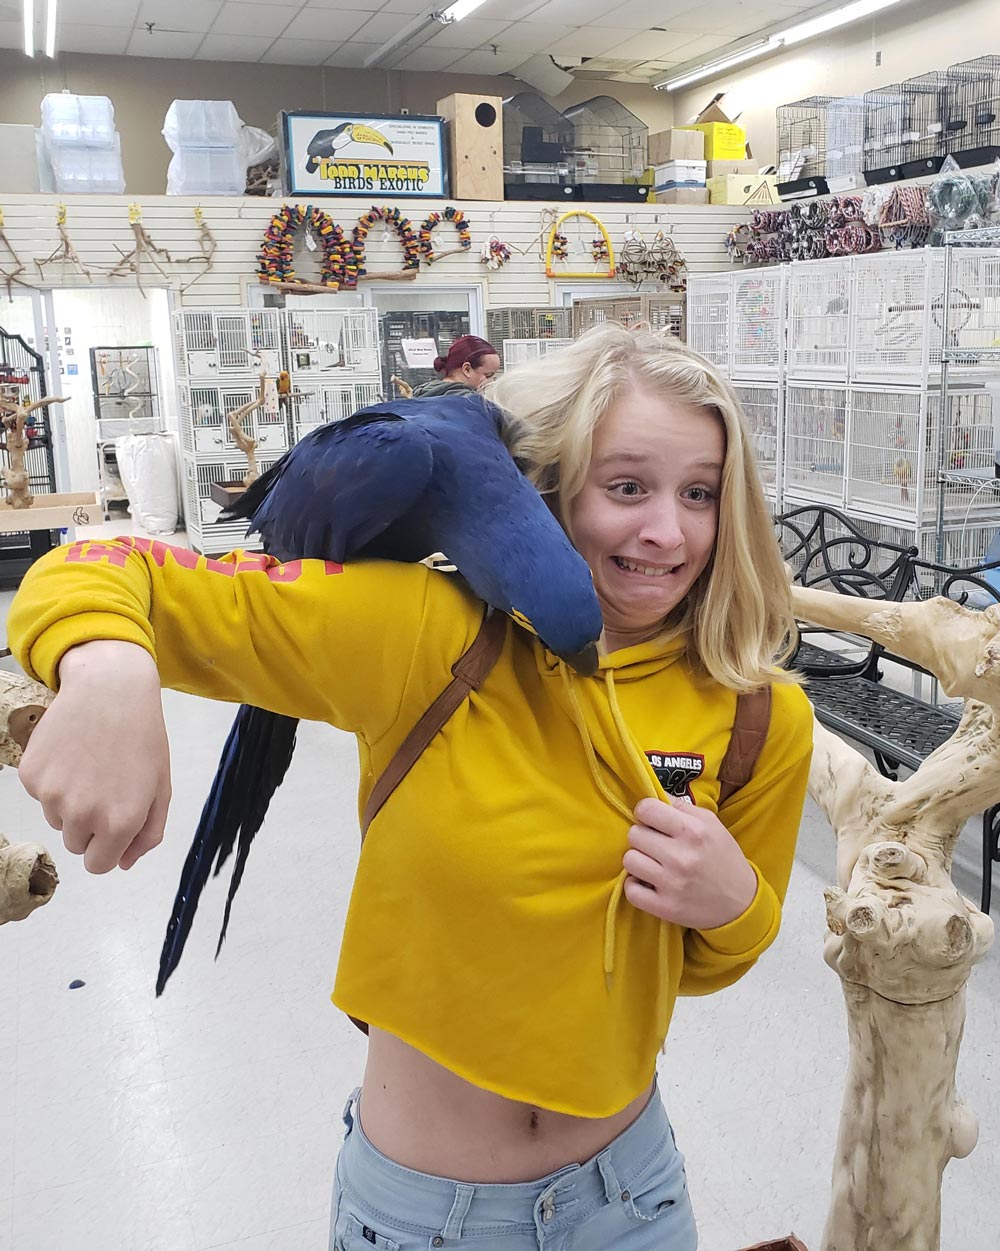 Took my friend to the bird store